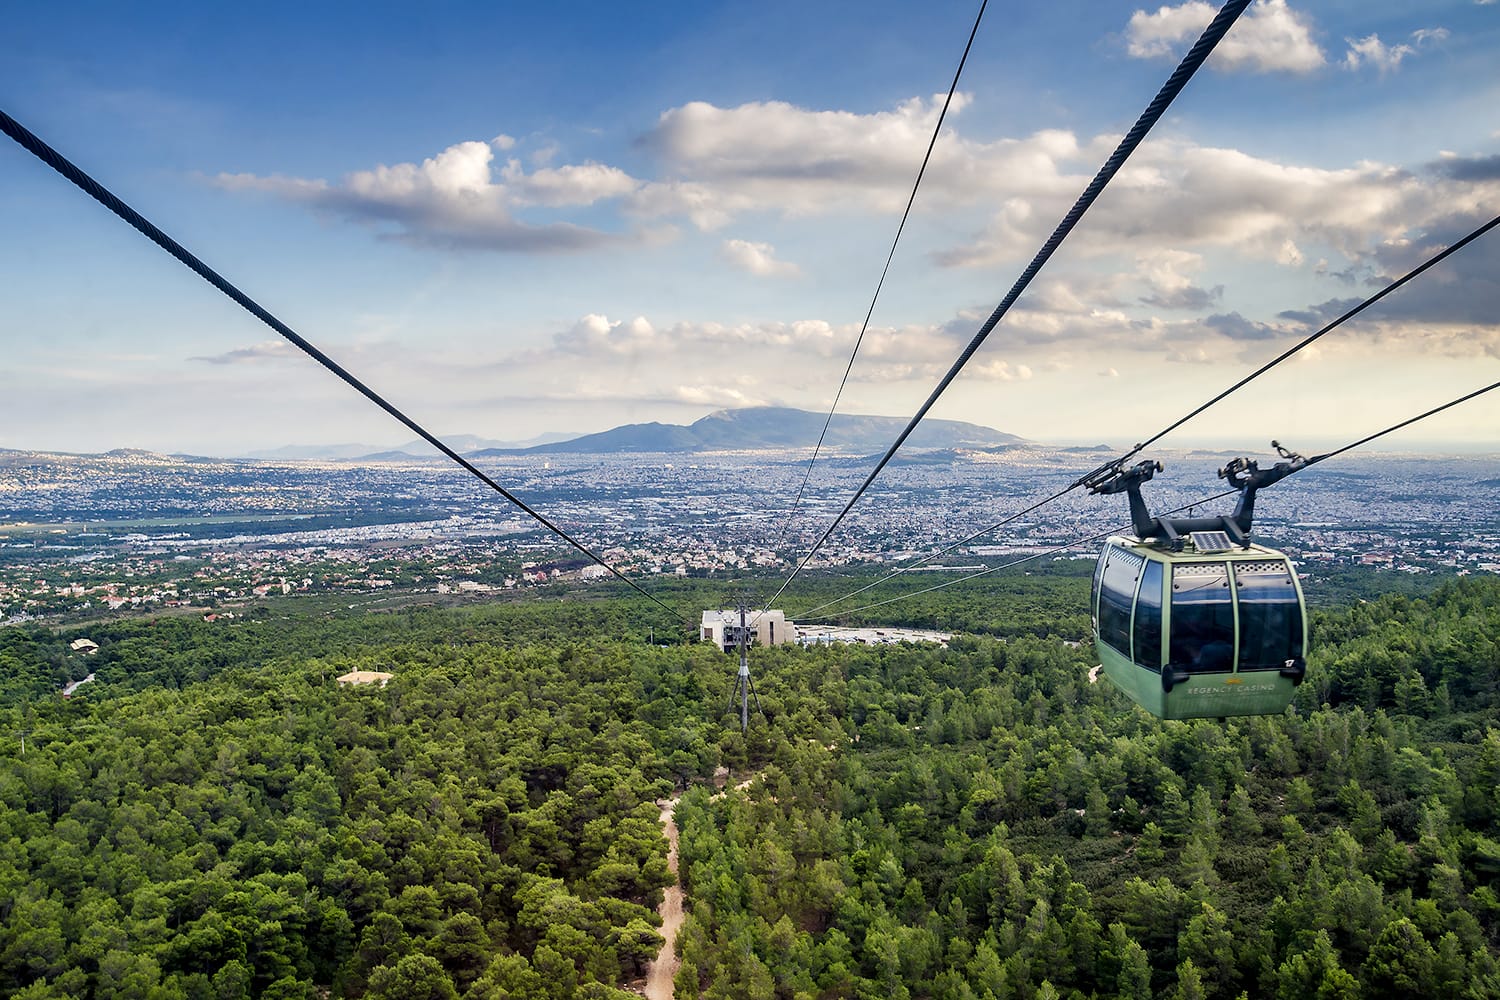 Cable car of the famous Regency Casino Mont Parnes and Hotel complex in Greece